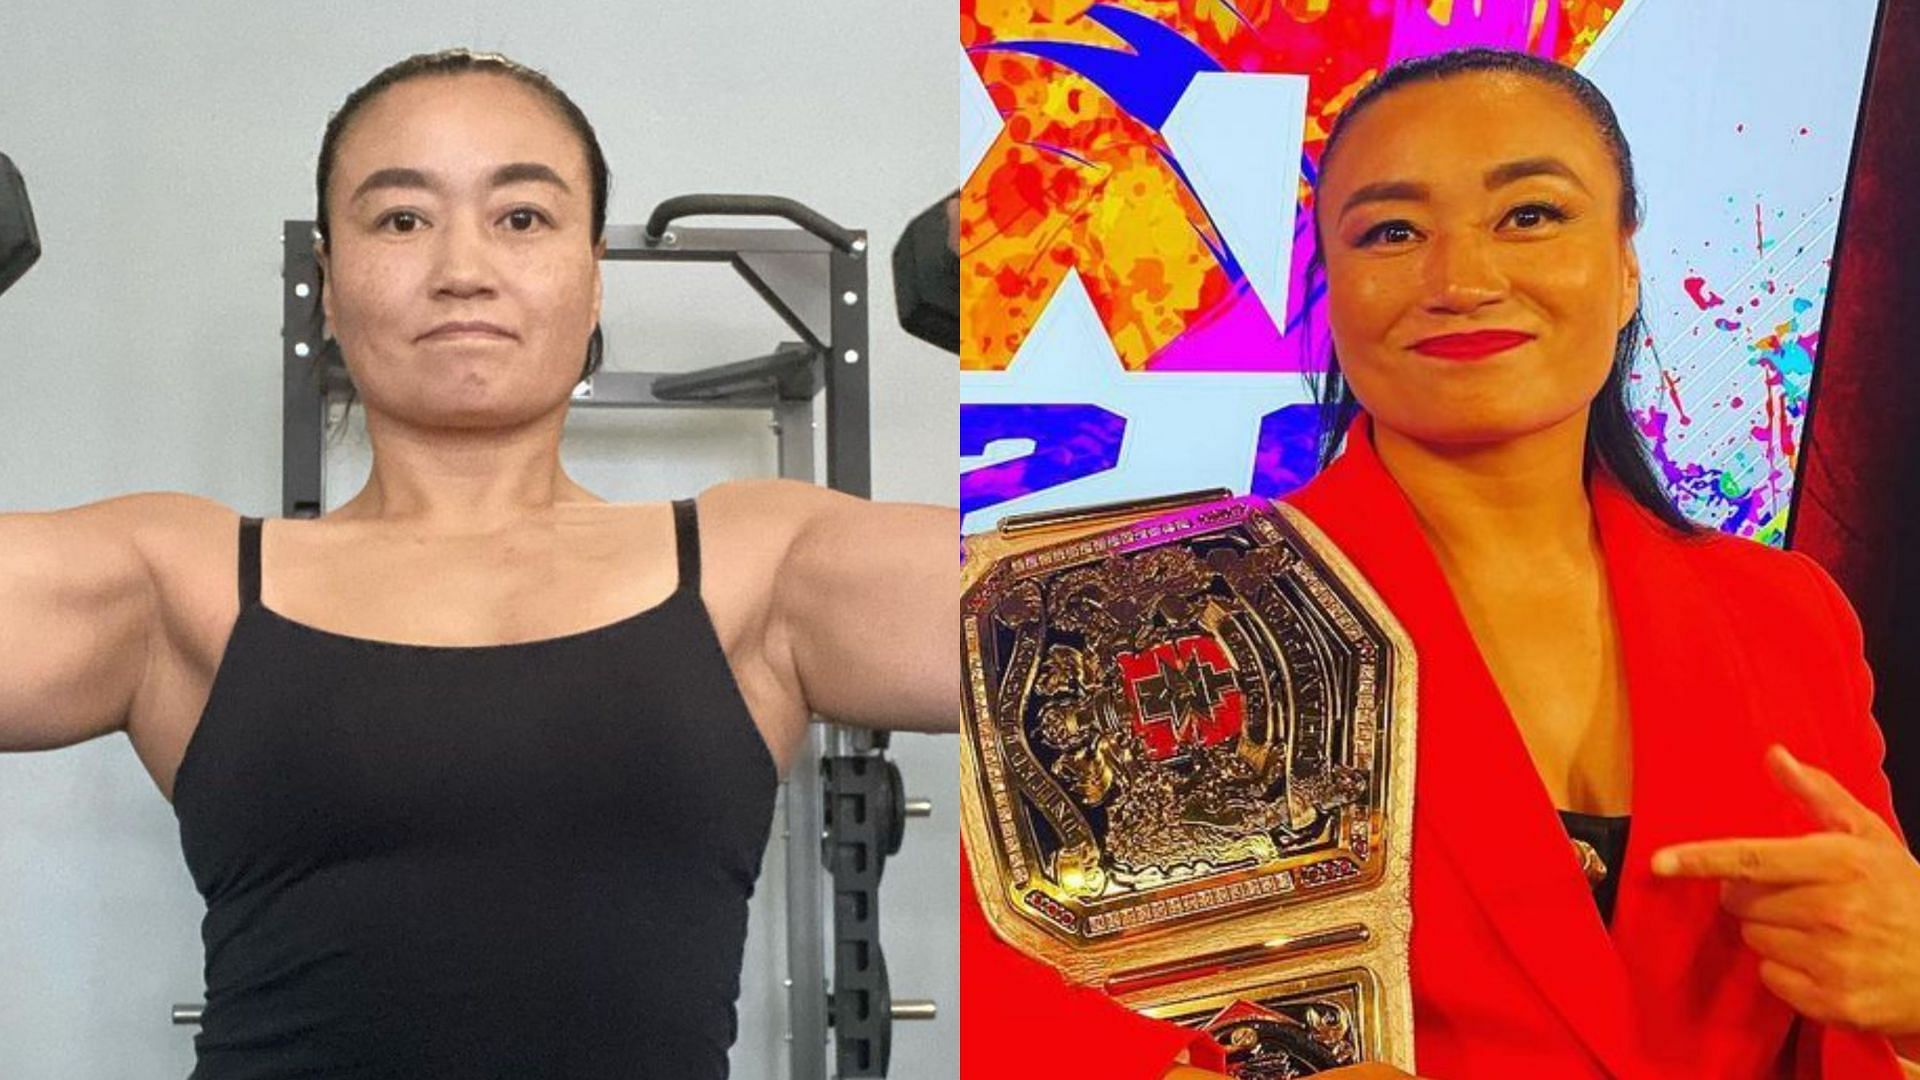 Meiko Satomura without makeup (left) and with makeup (right)